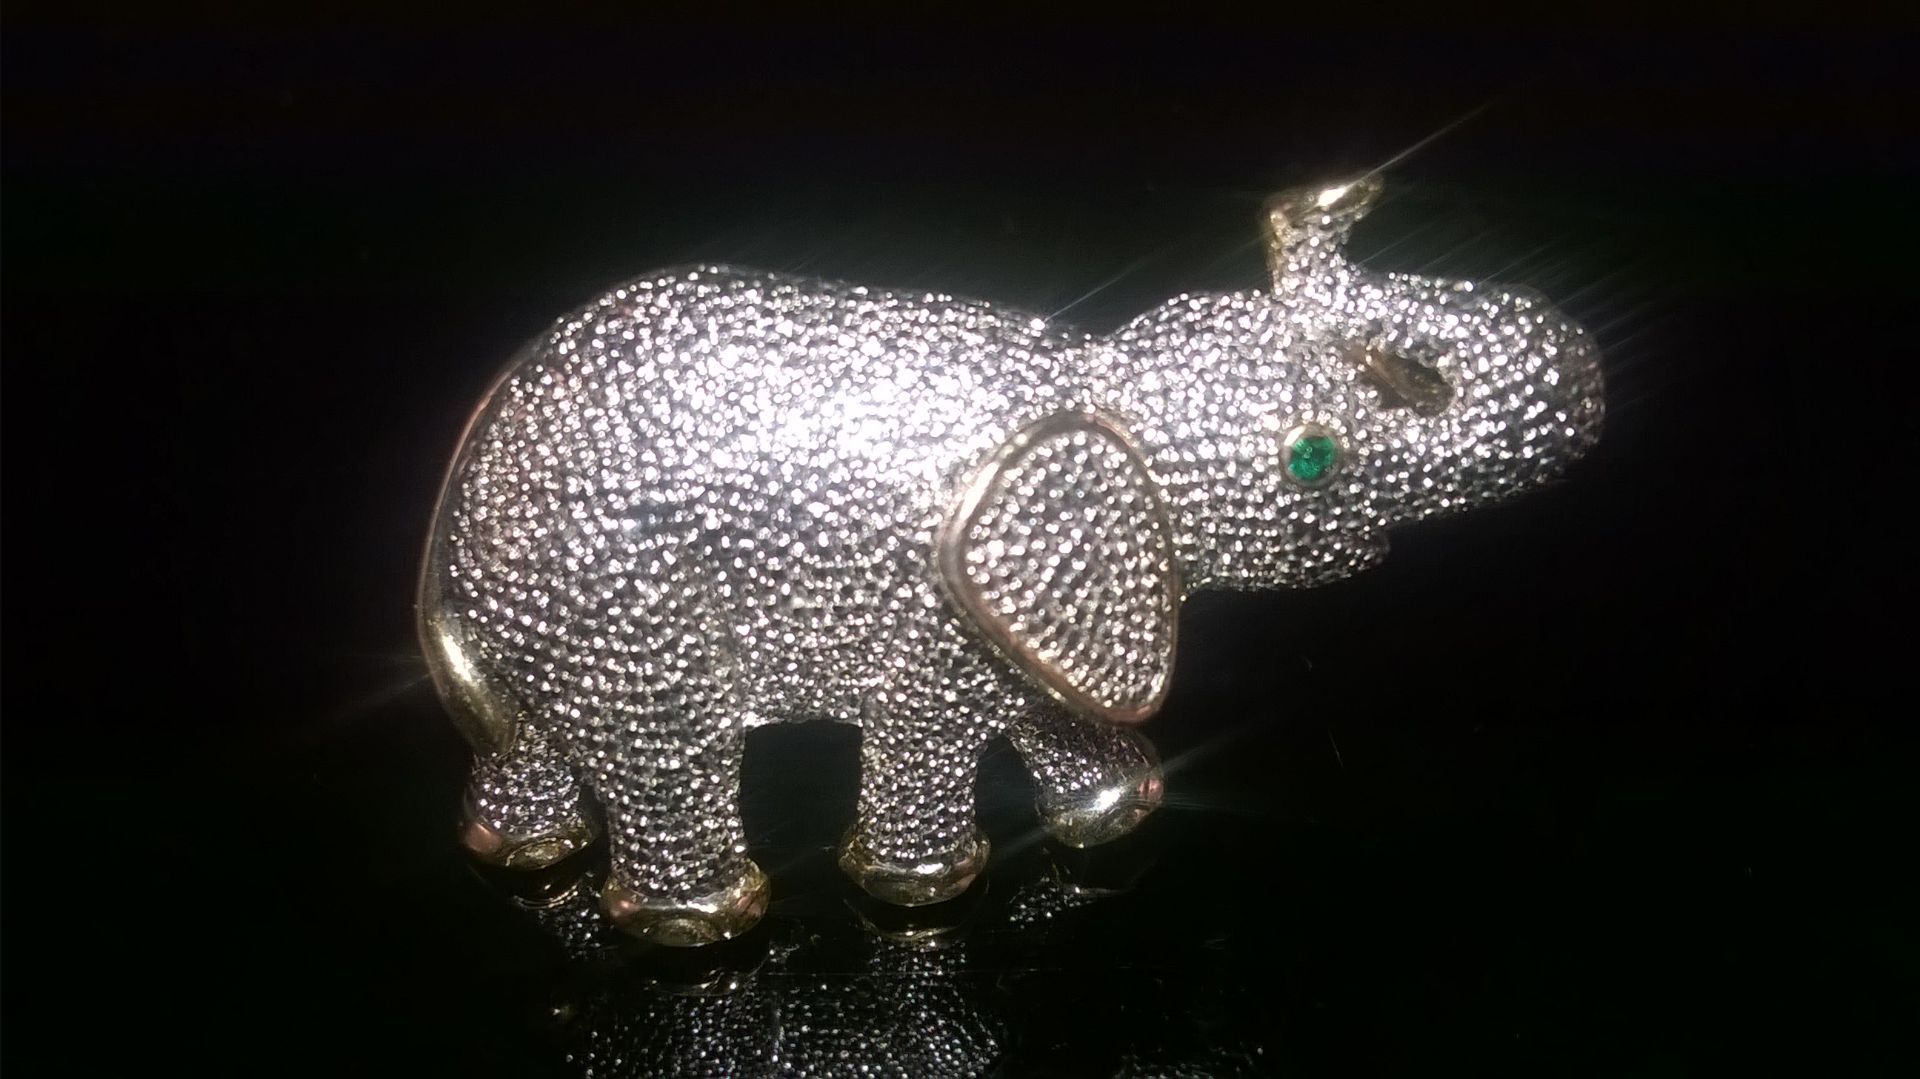 VINTAGE BROOCH IN THE FORM OF AN ELEPHANT WITH GREEN STONE EYE This is a beautiful vintage brooch in